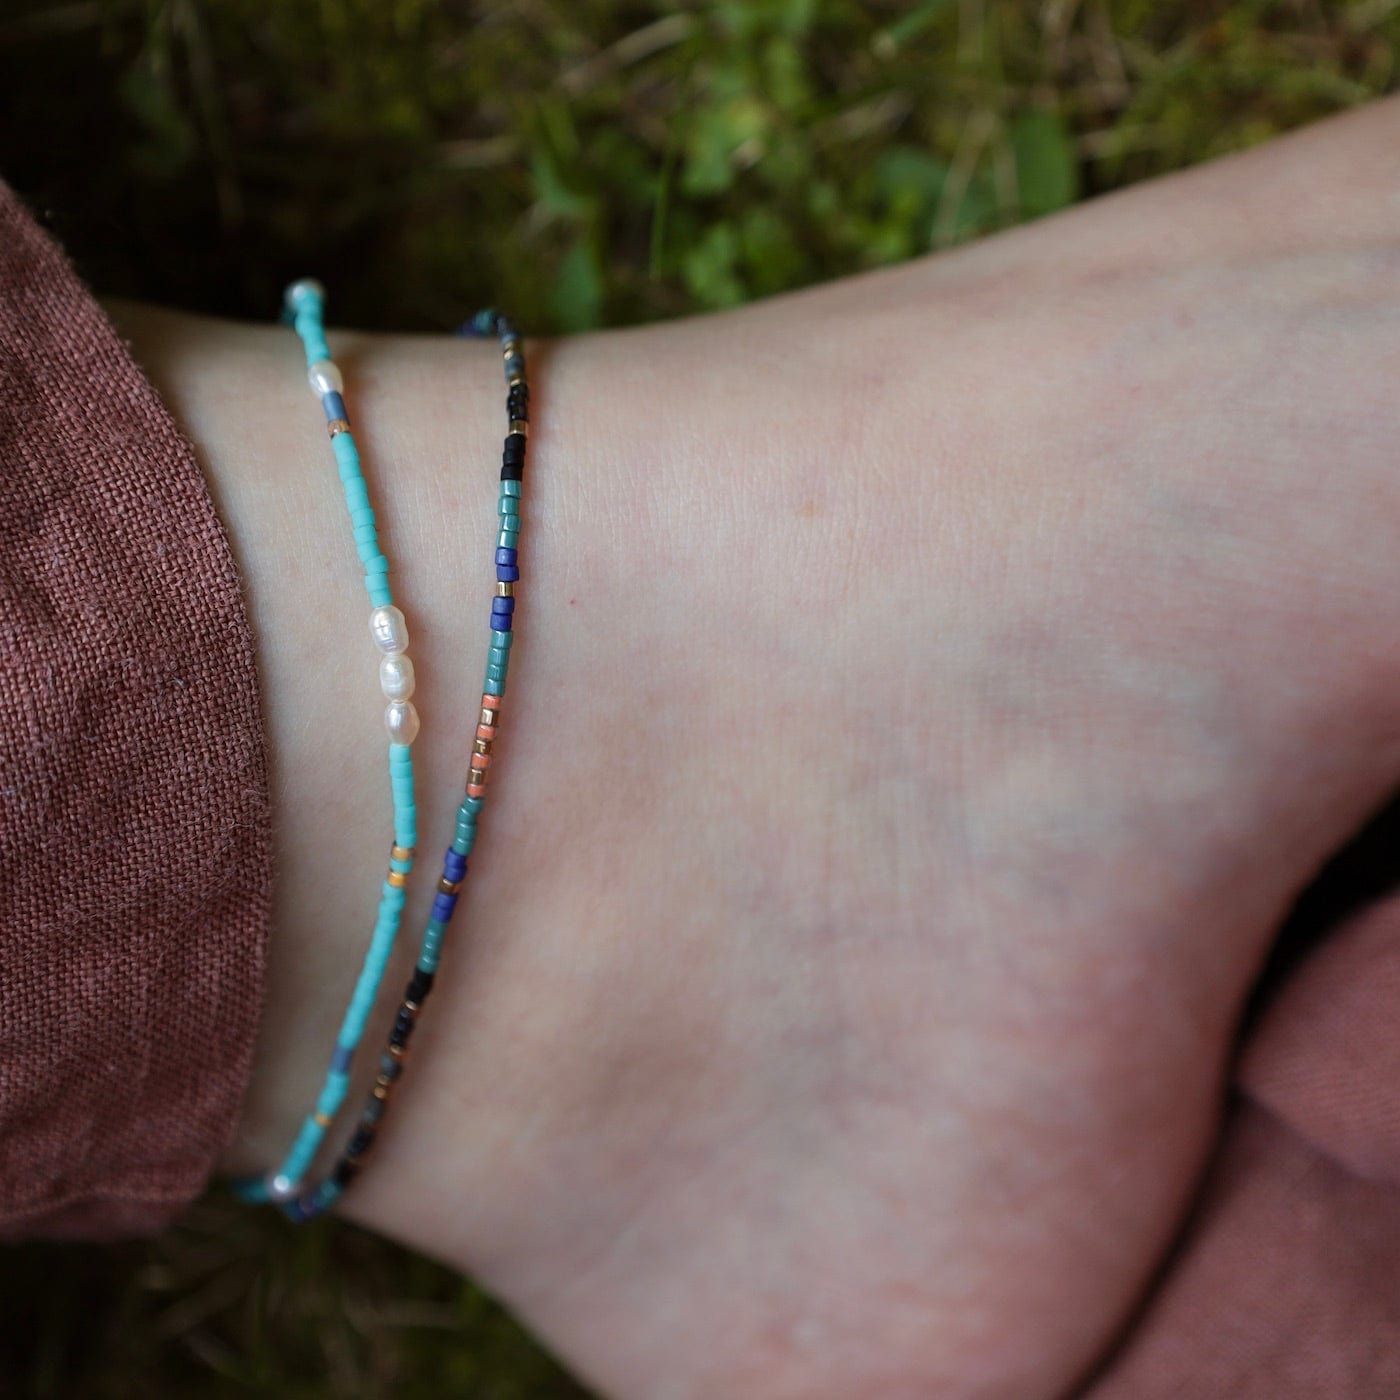 Buy Dainty Beaded Anklet, Native Ankle Bracelet, Seed Bead Jewelry,  Multicolor Bead Anklet, Summer Body Chain, Boho Foot Bracelet, Gift for Her  Online in India - Etsy